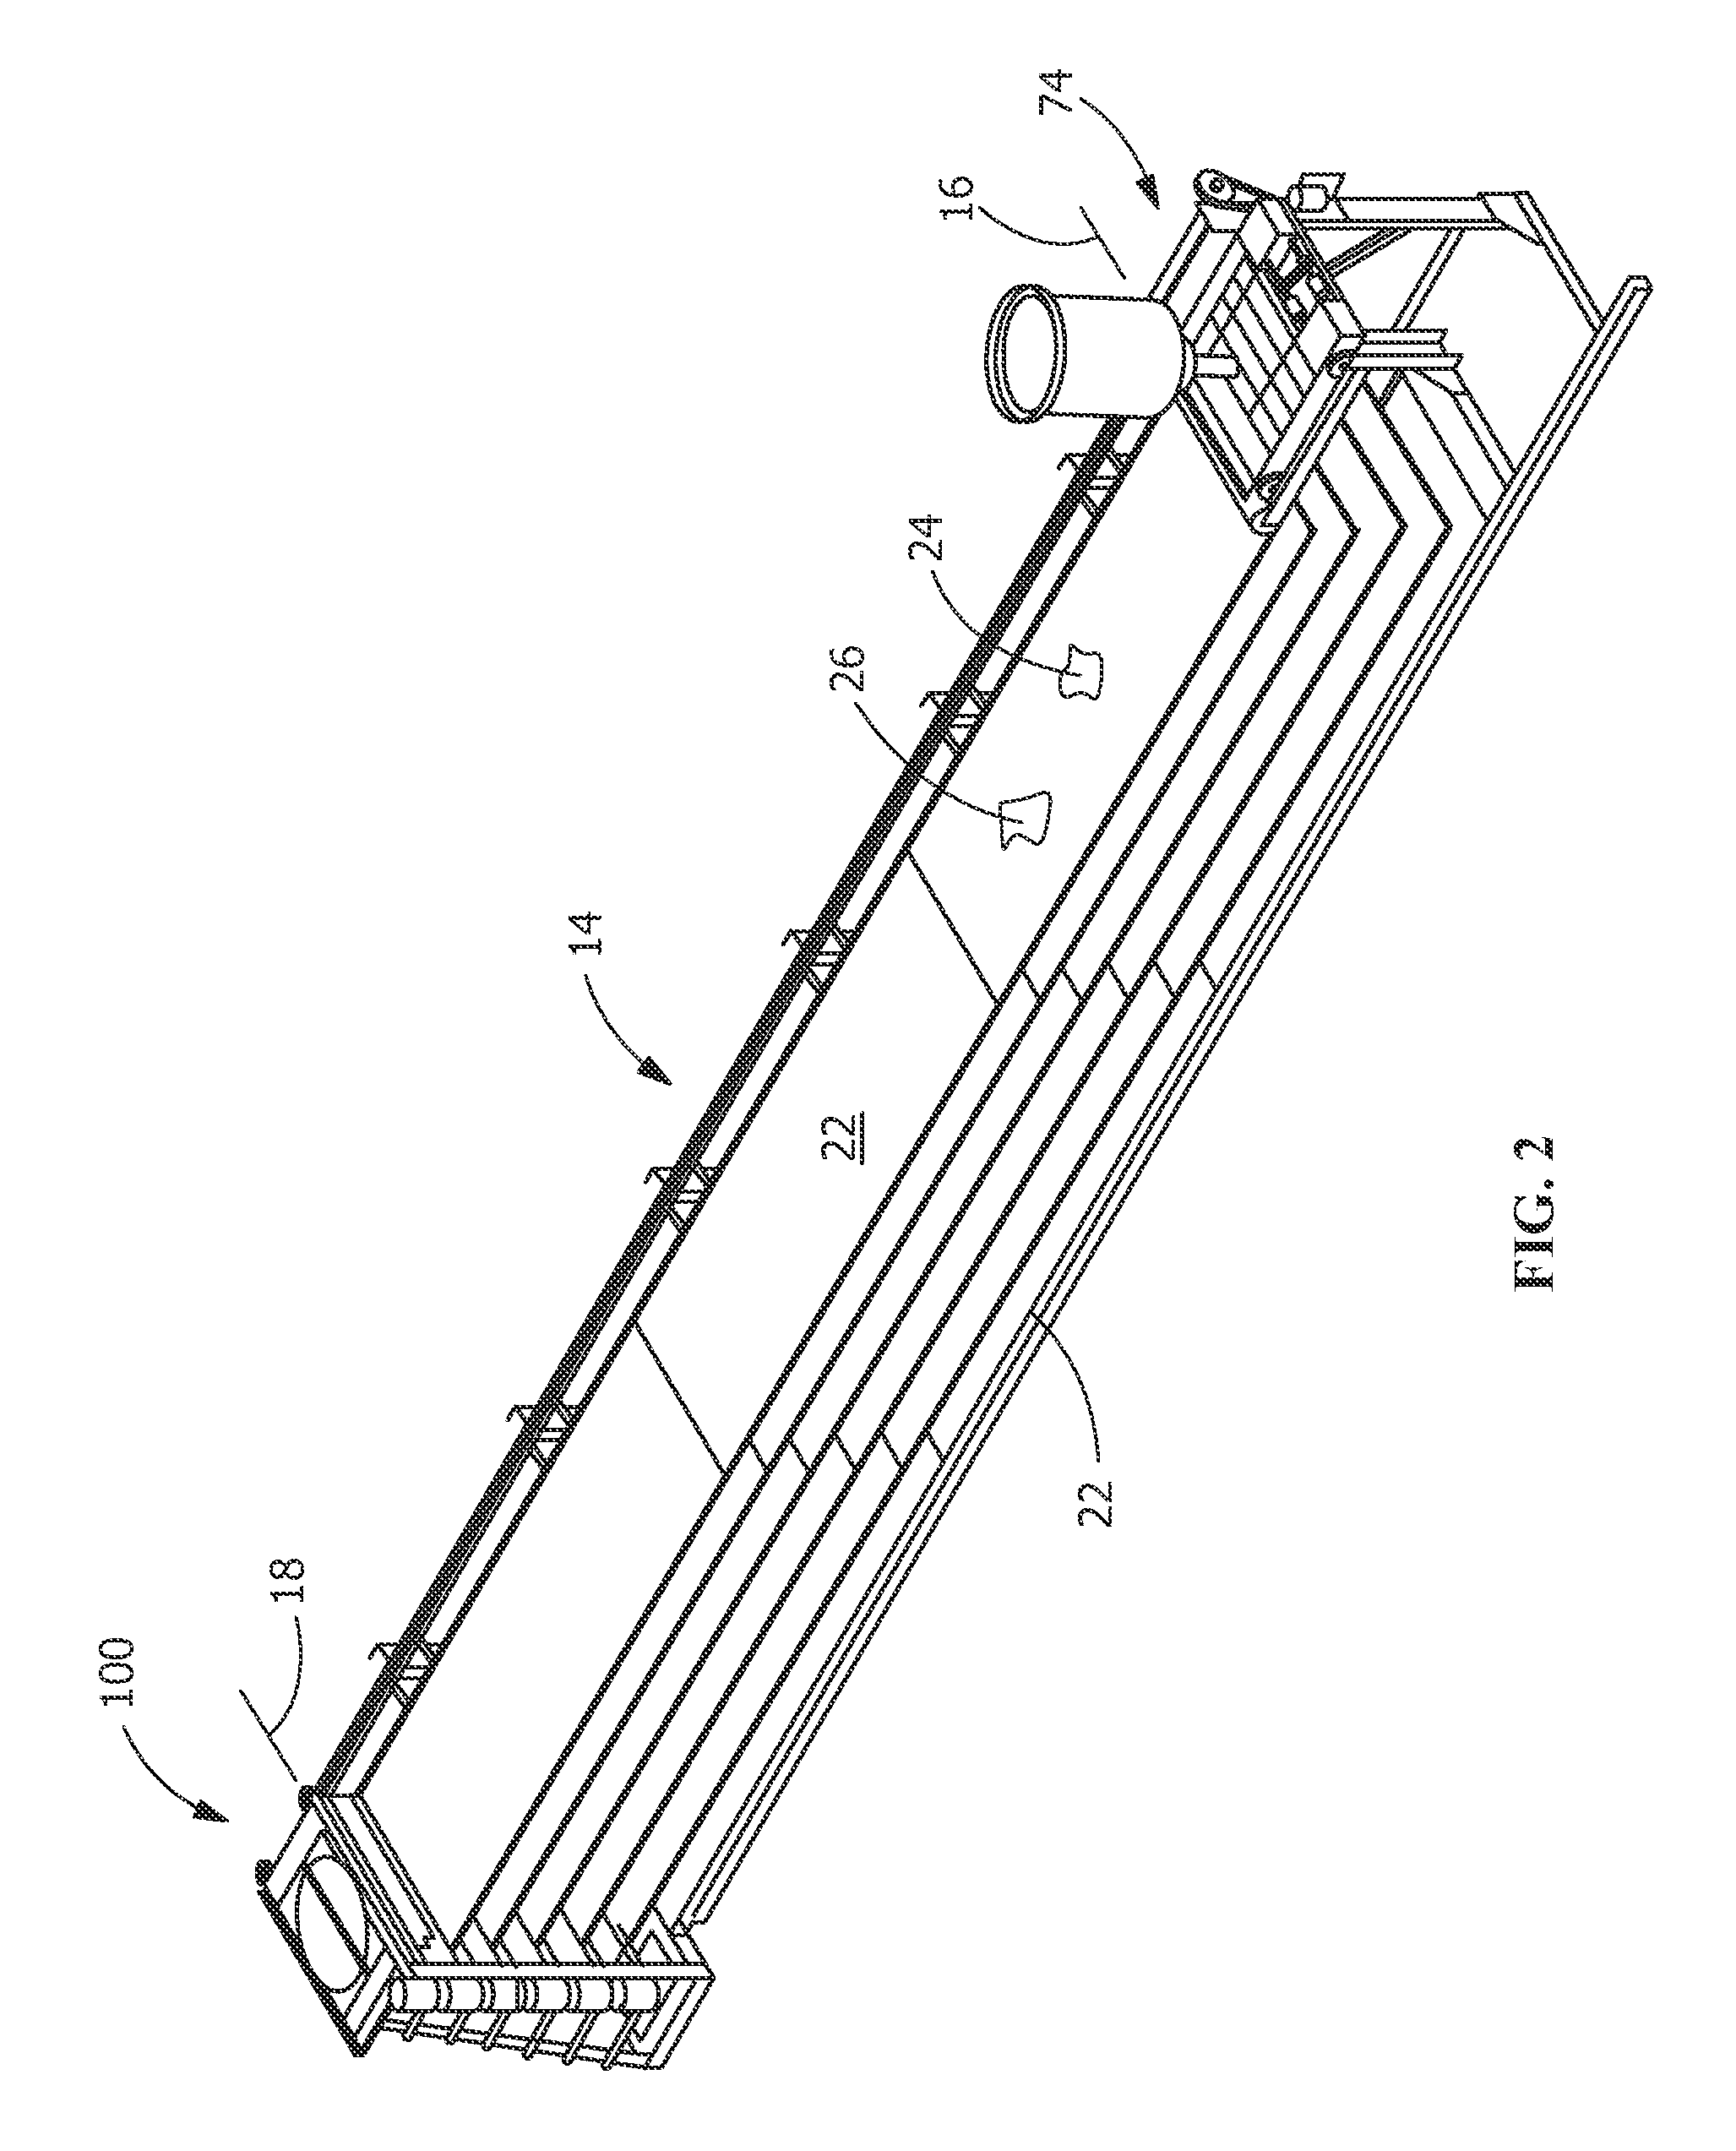 Sprouted seed grain growing and harvesting apparatus